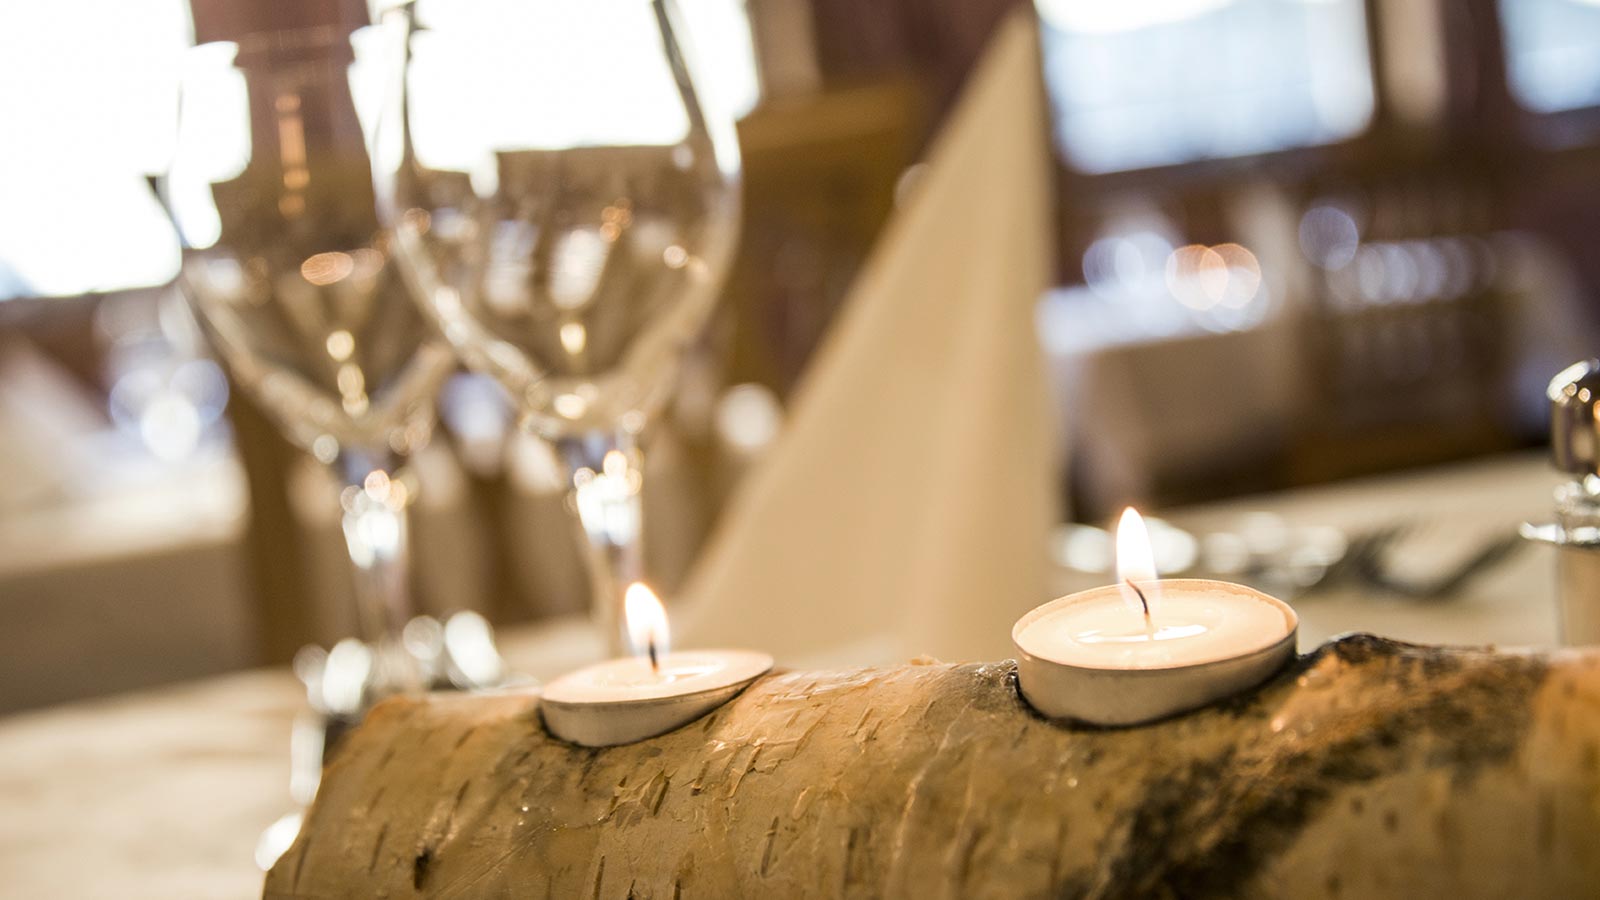 Table decoration made of wood with lighted candles and glass goblets in the background